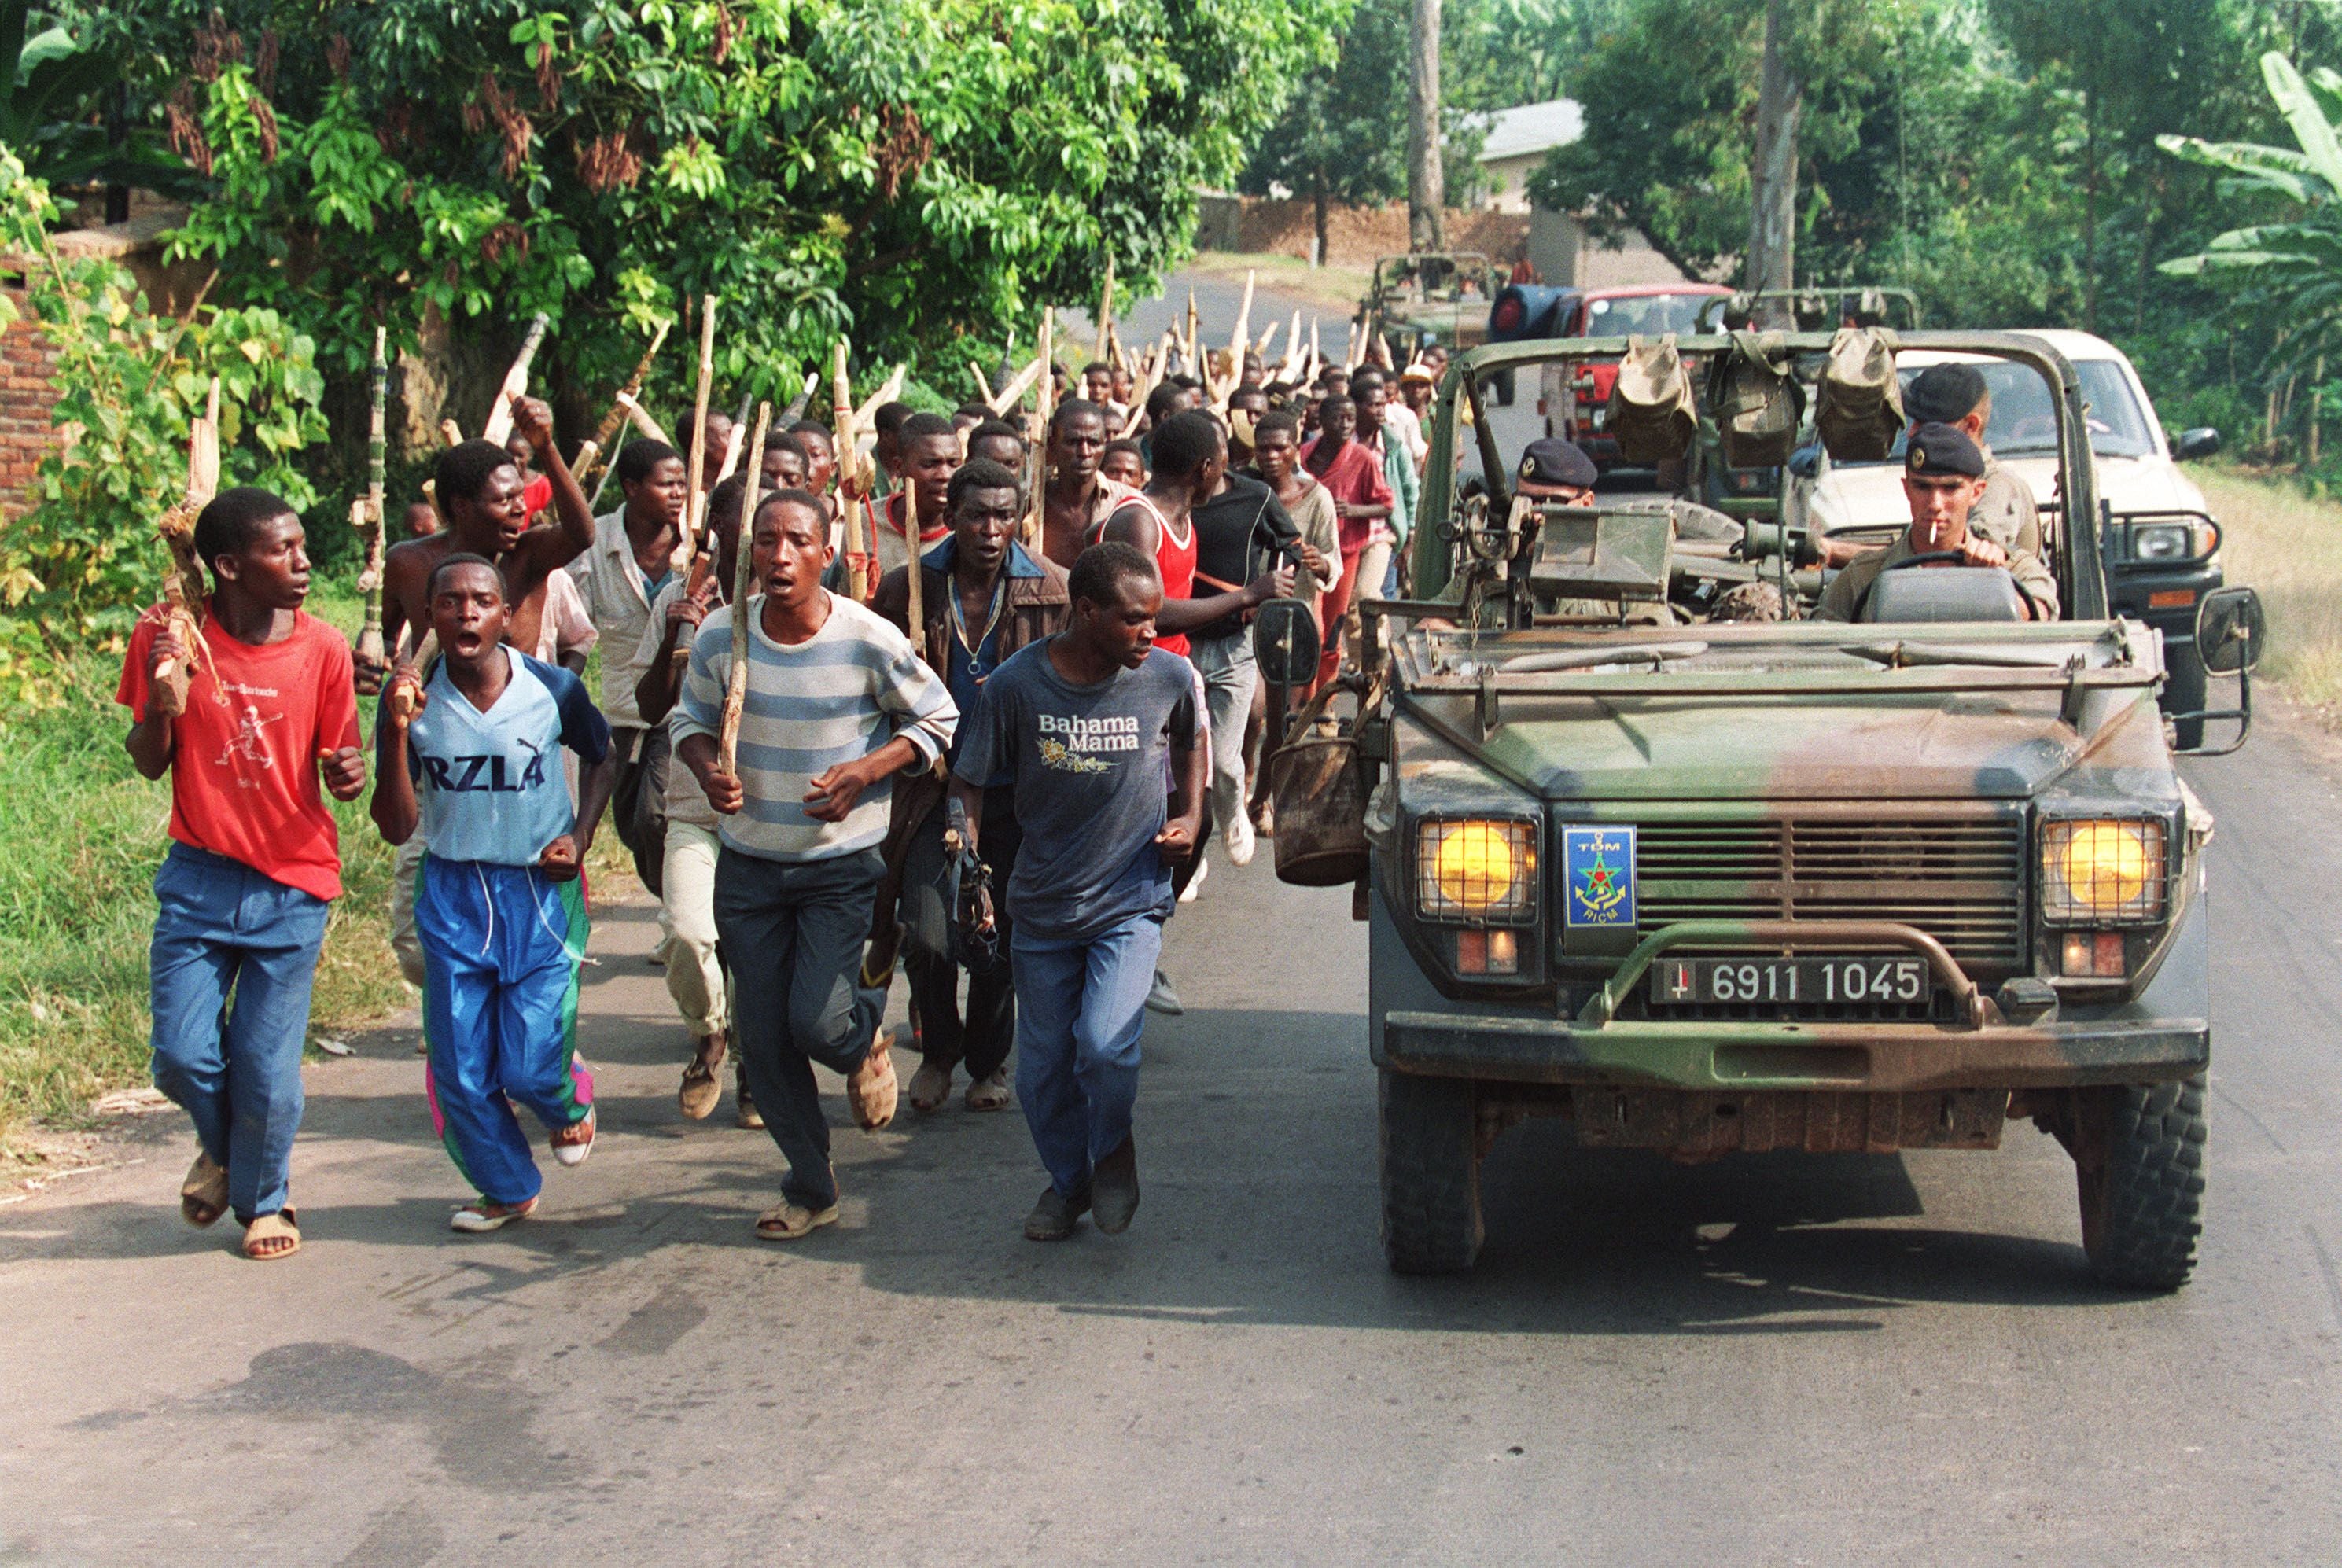 A report on France’s role in the 1994 Rwandan genocide is set to be published